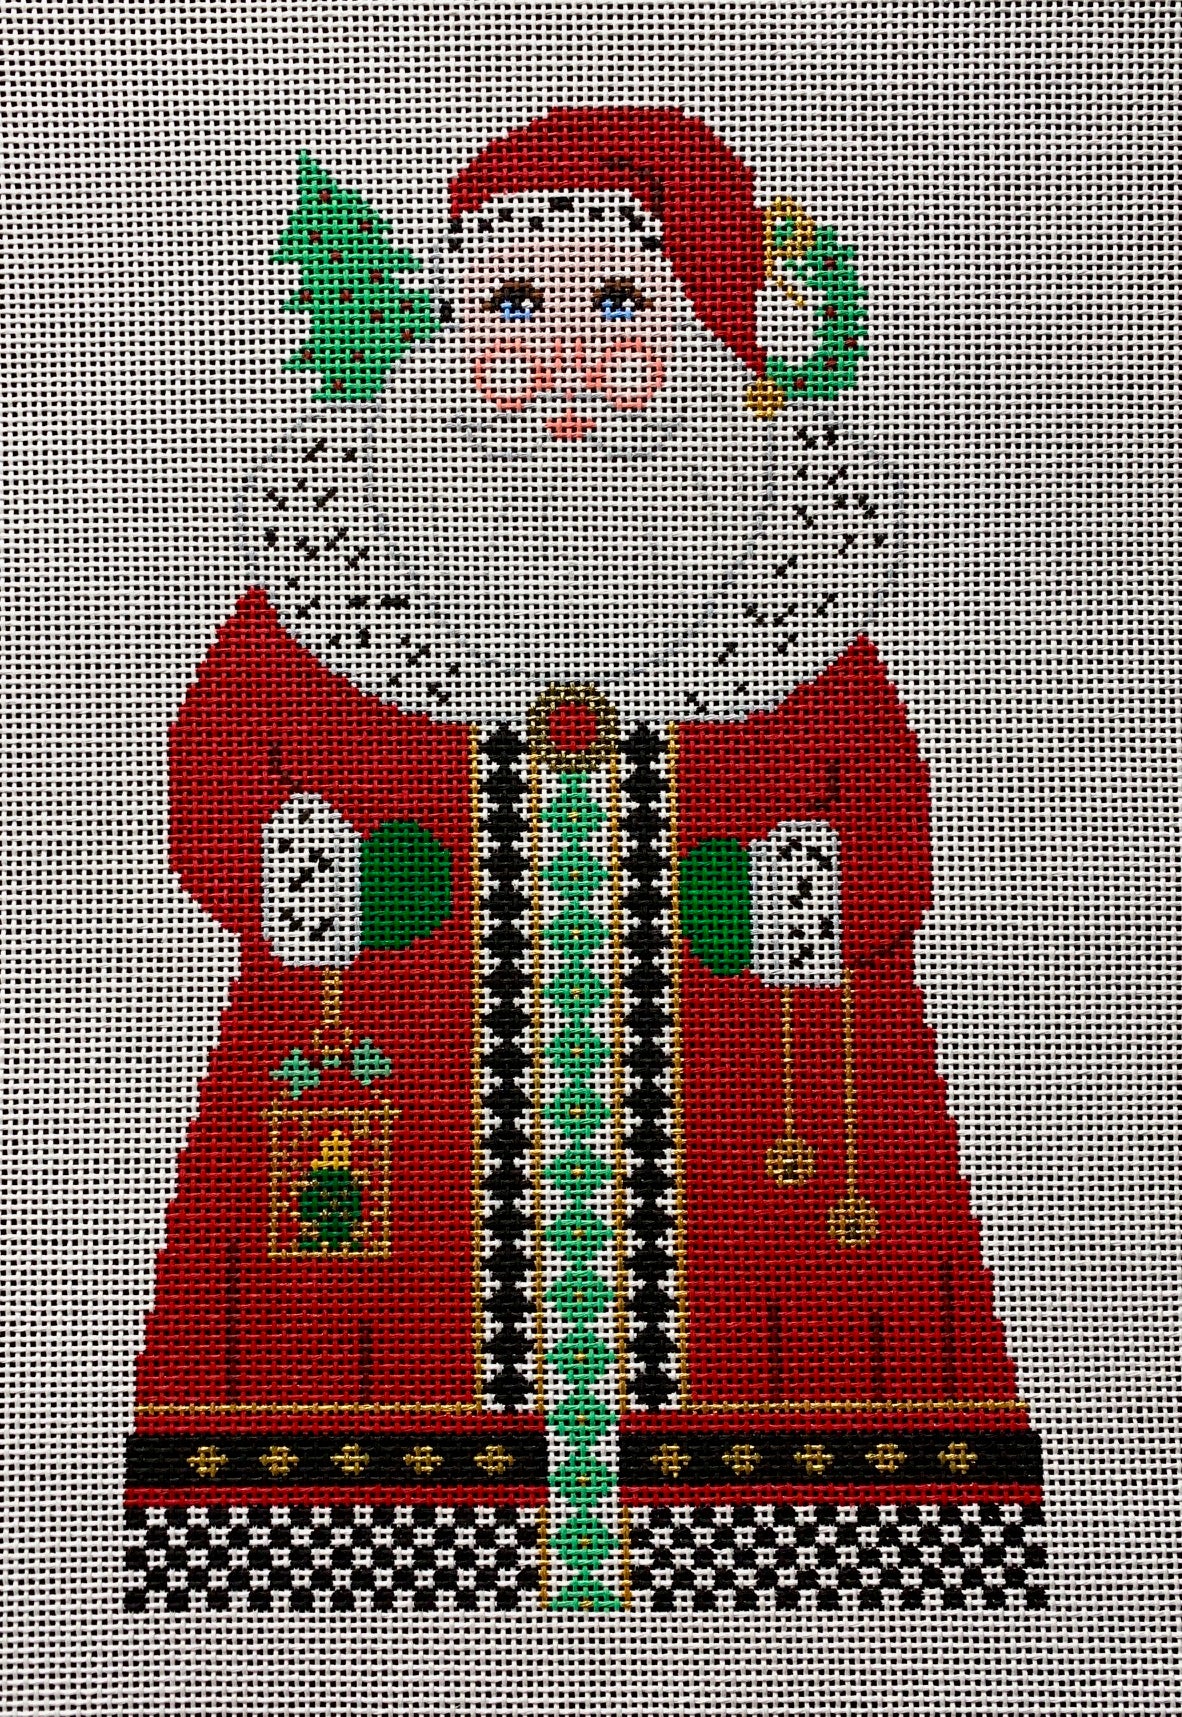 12003 - Courtly Santa